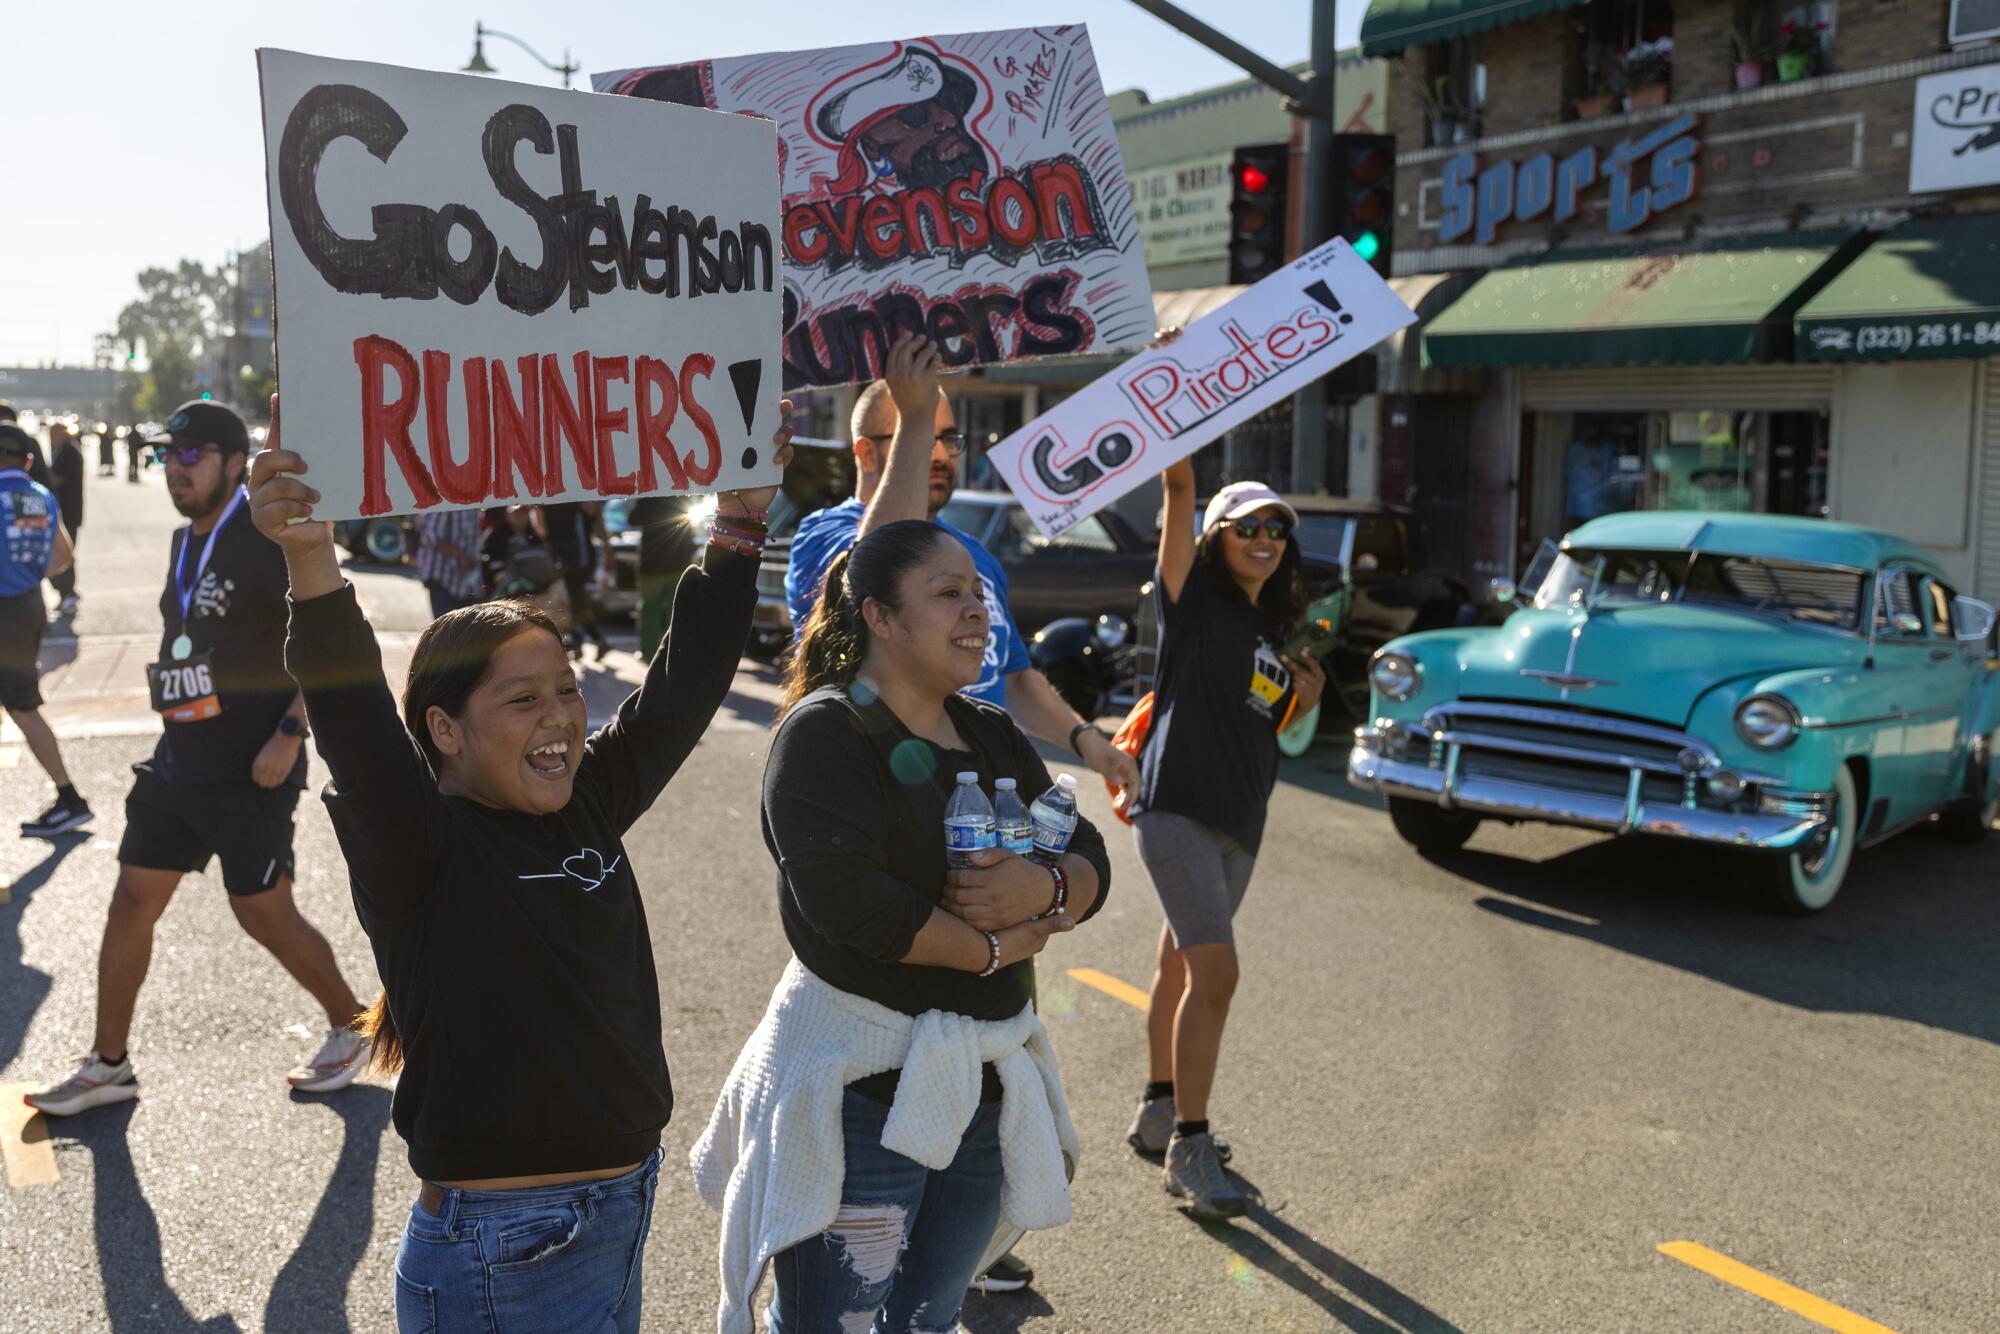 People hold signs waiting for runners to cross finish line of the Boyle Heights 5K